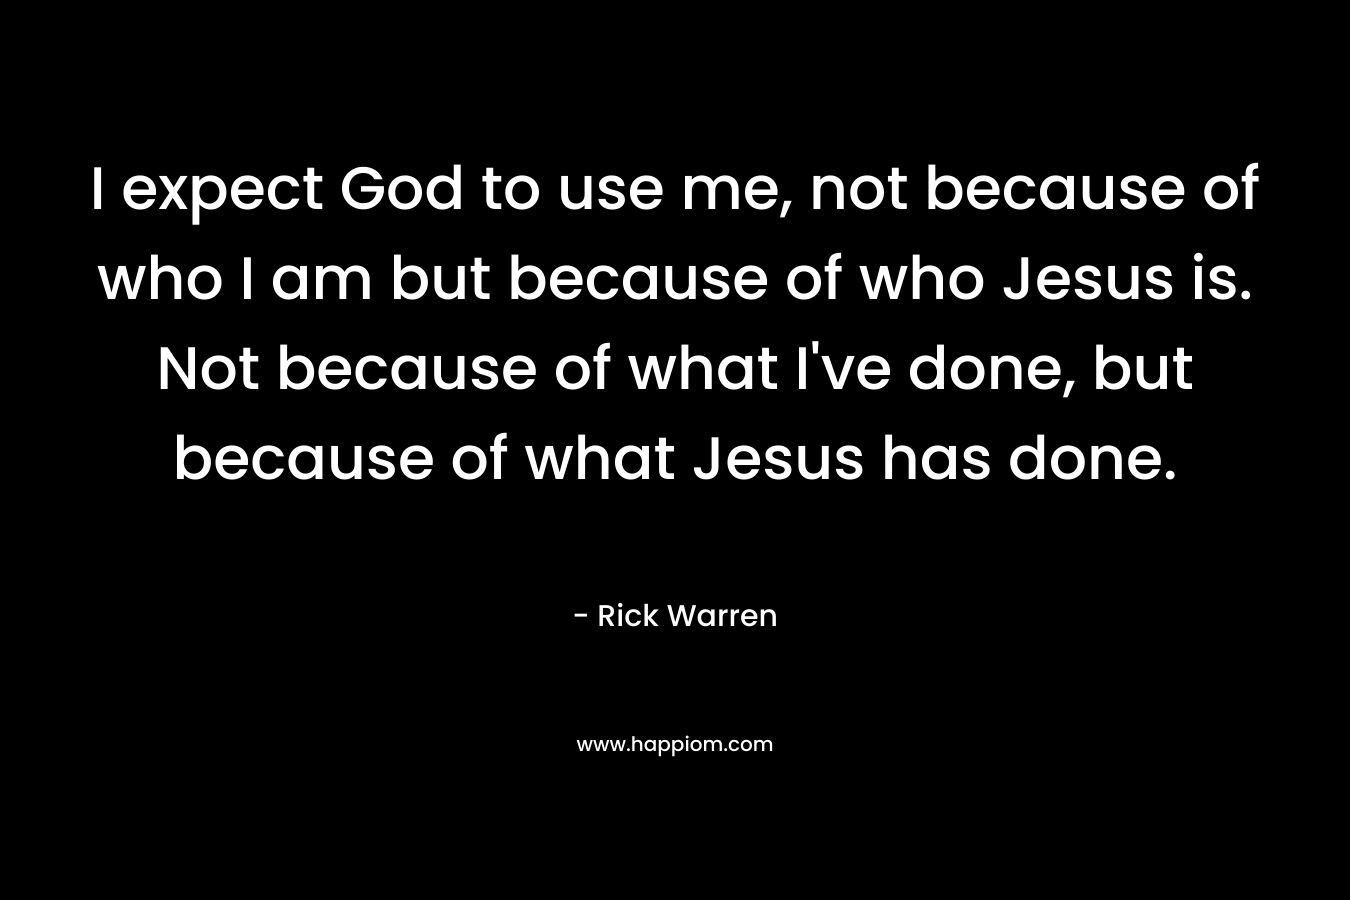 I expect God to use me, not because of who I am but because of who Jesus is. Not because of what I’ve done, but because of what Jesus has done. – Rick Warren